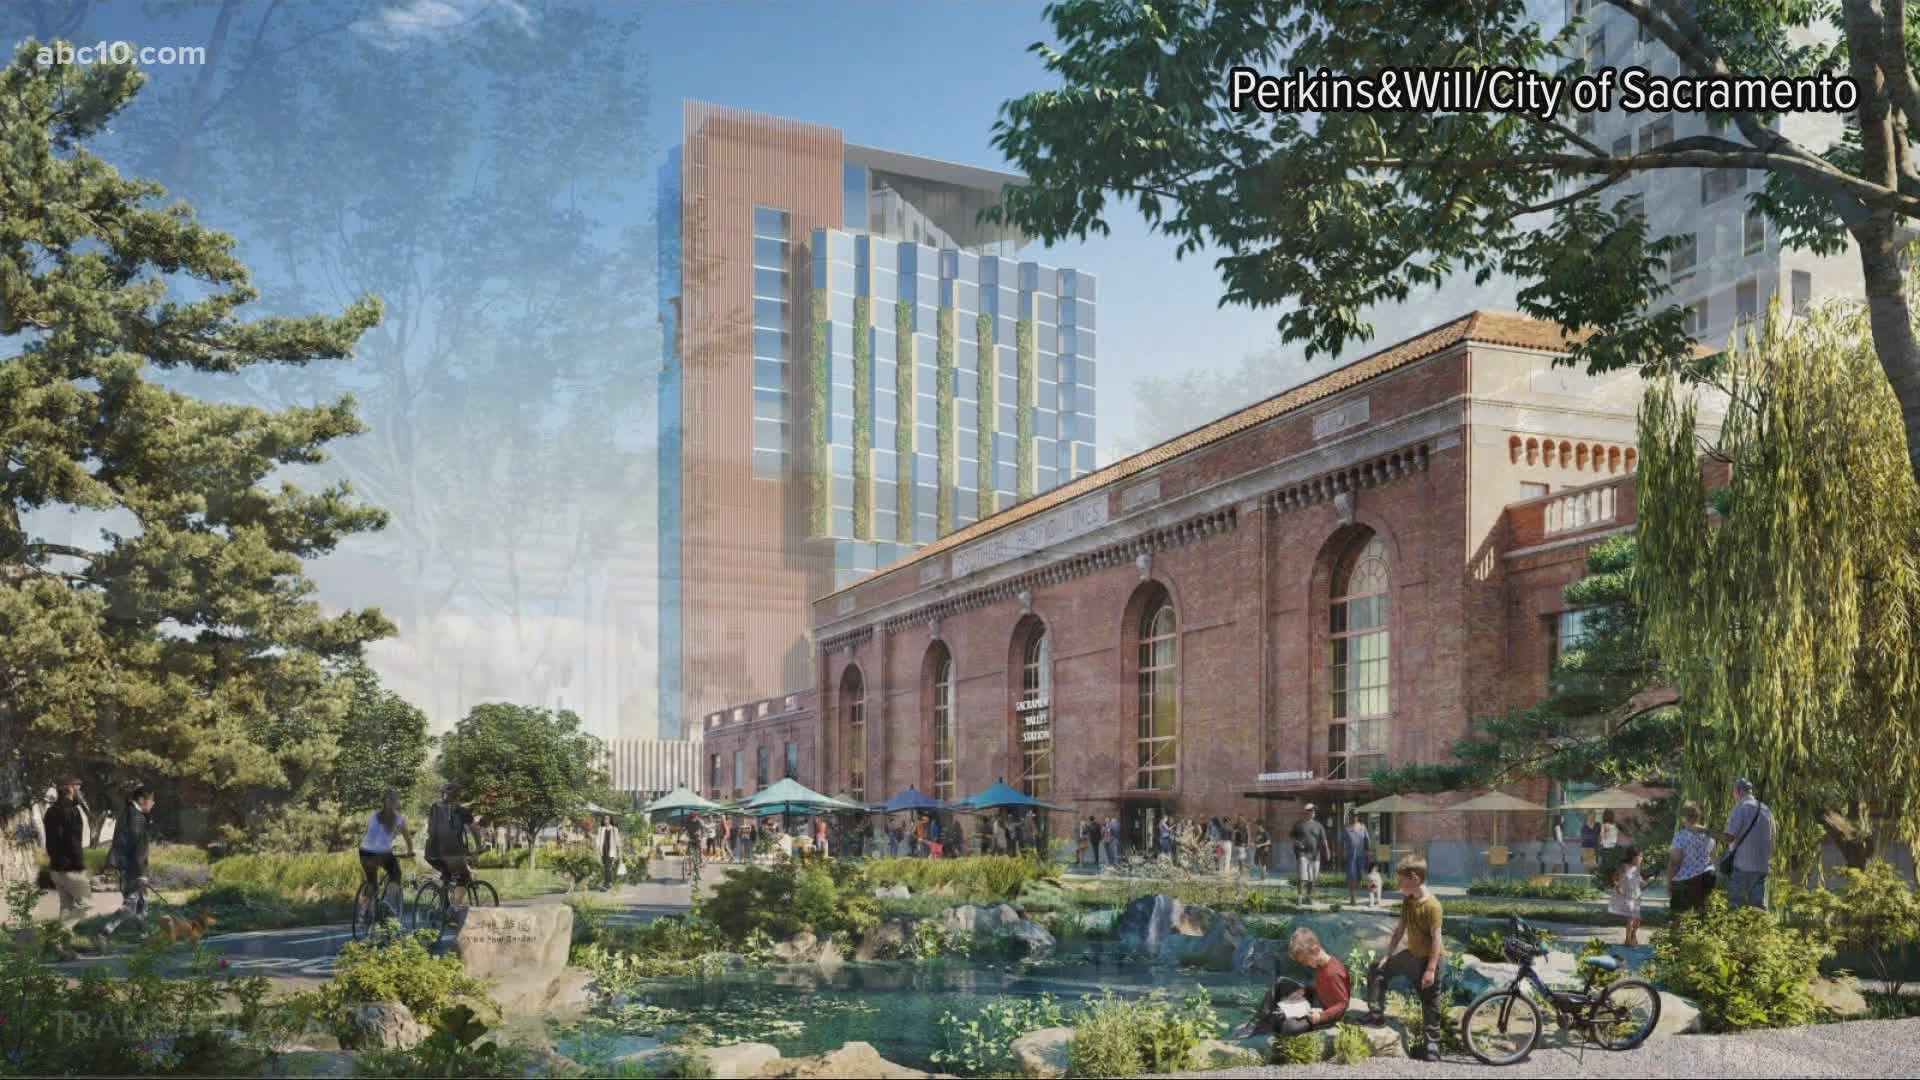 While transit-based at its core, the Sacramento Valley Station Plan has much greater ambitions, like changing the way people experience travel and the city itself.